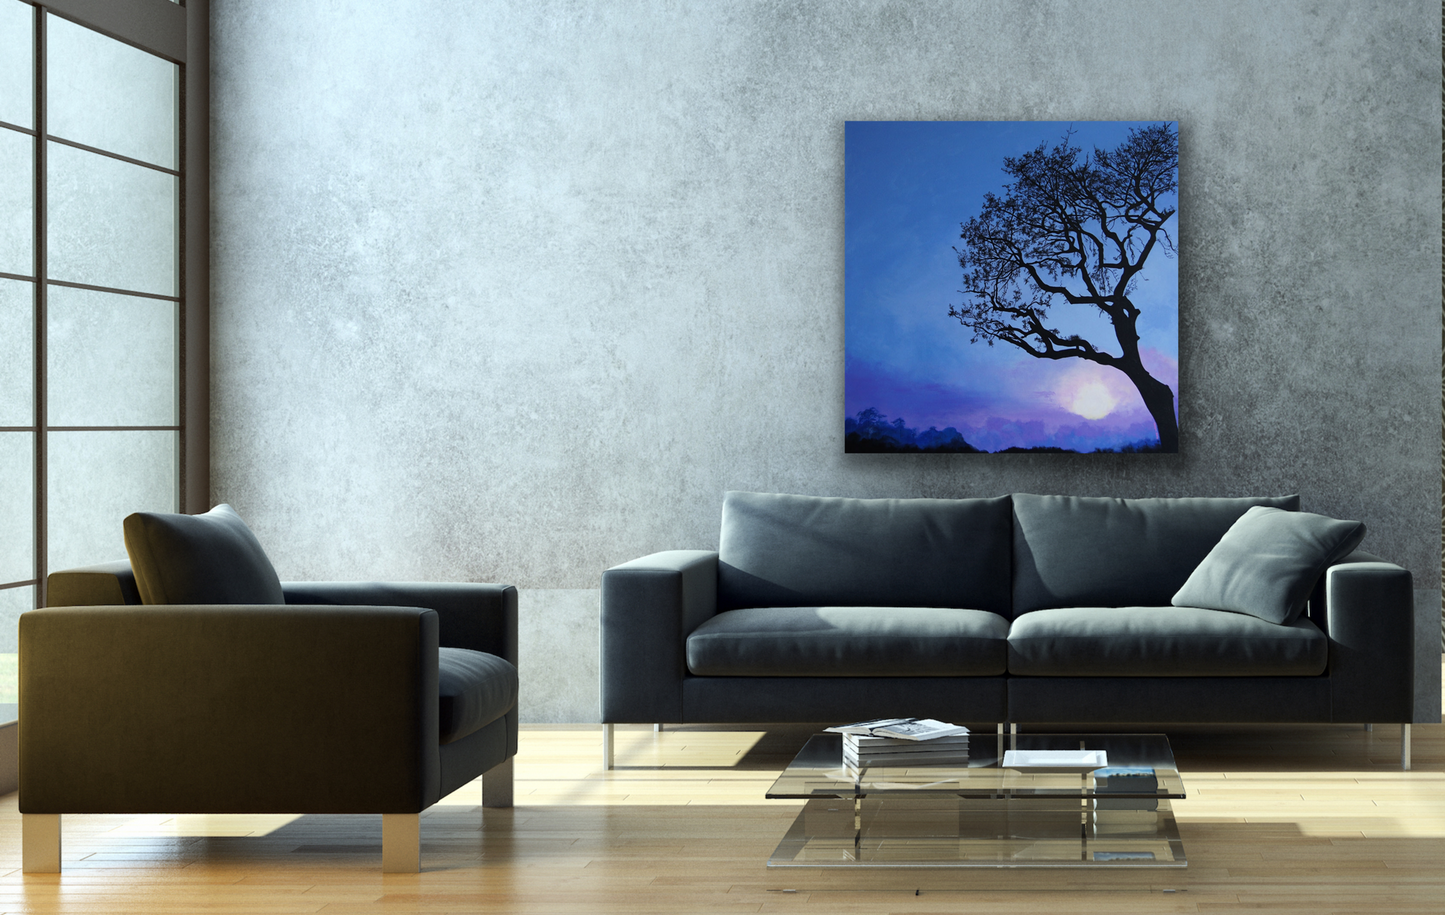 "Majestic" work of art will look impressive in your  living room or dining room.